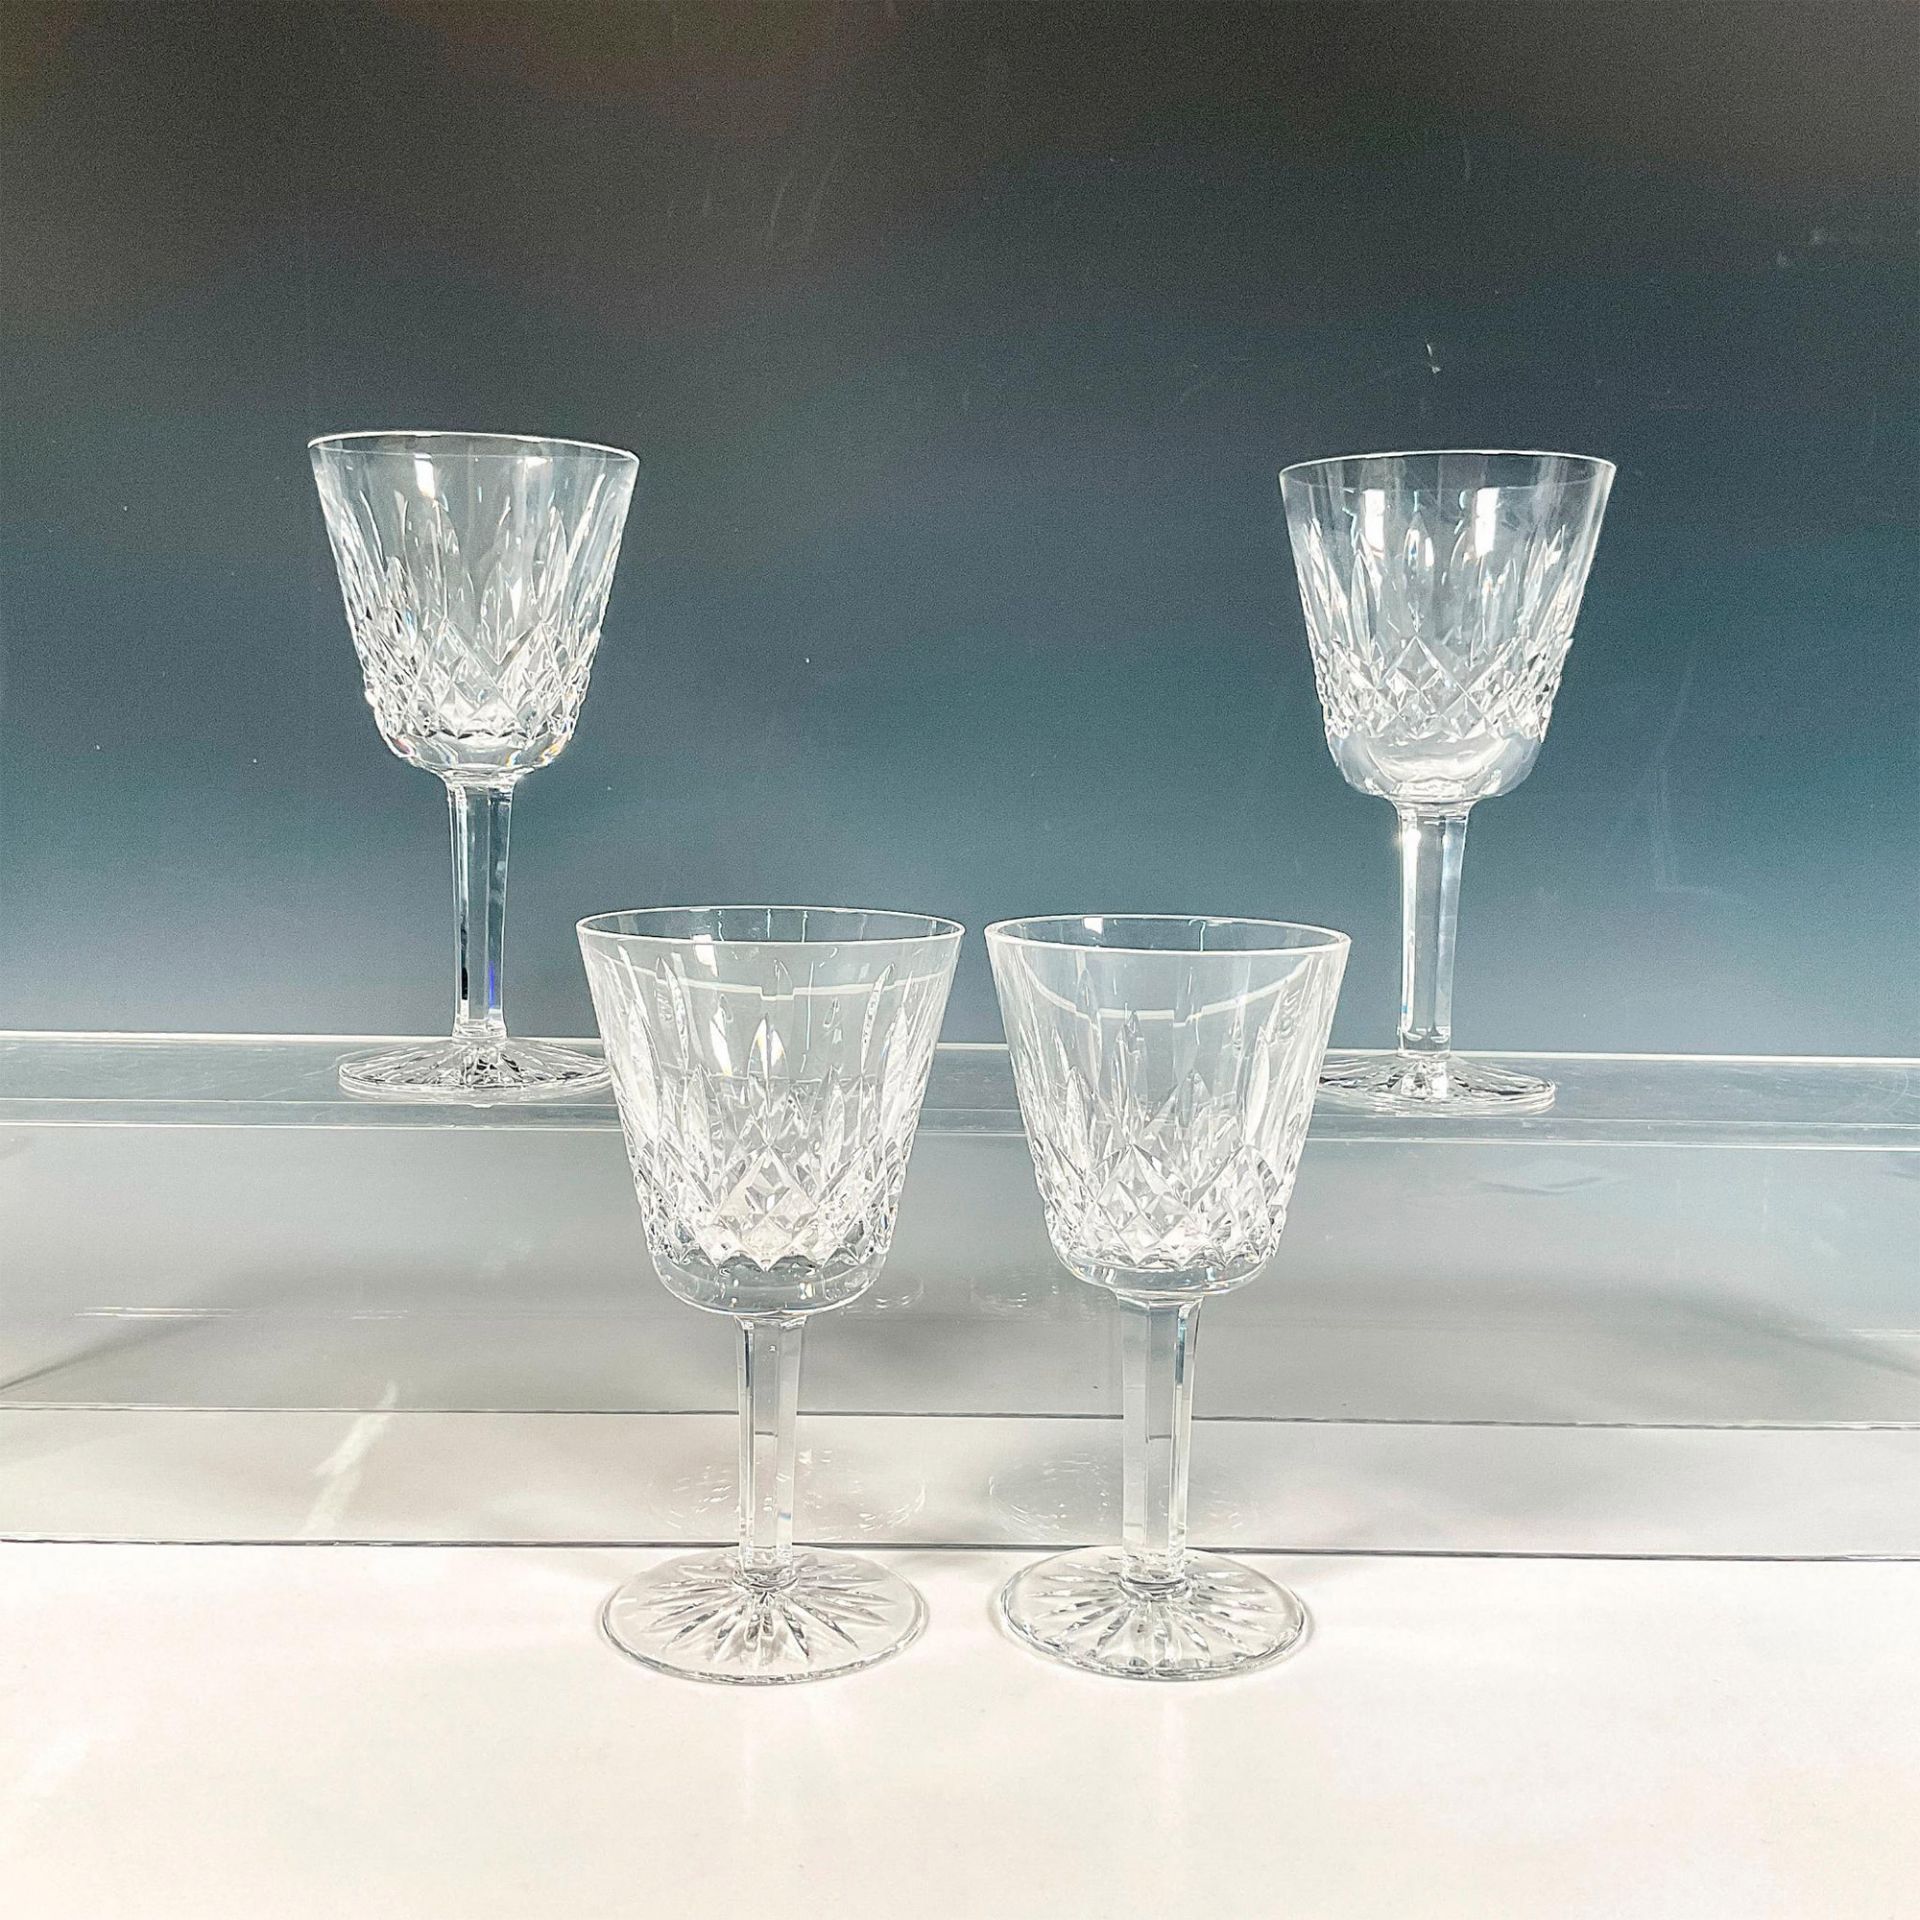 4pc Waterford Crystal Claret Wine Glasses, Lismore